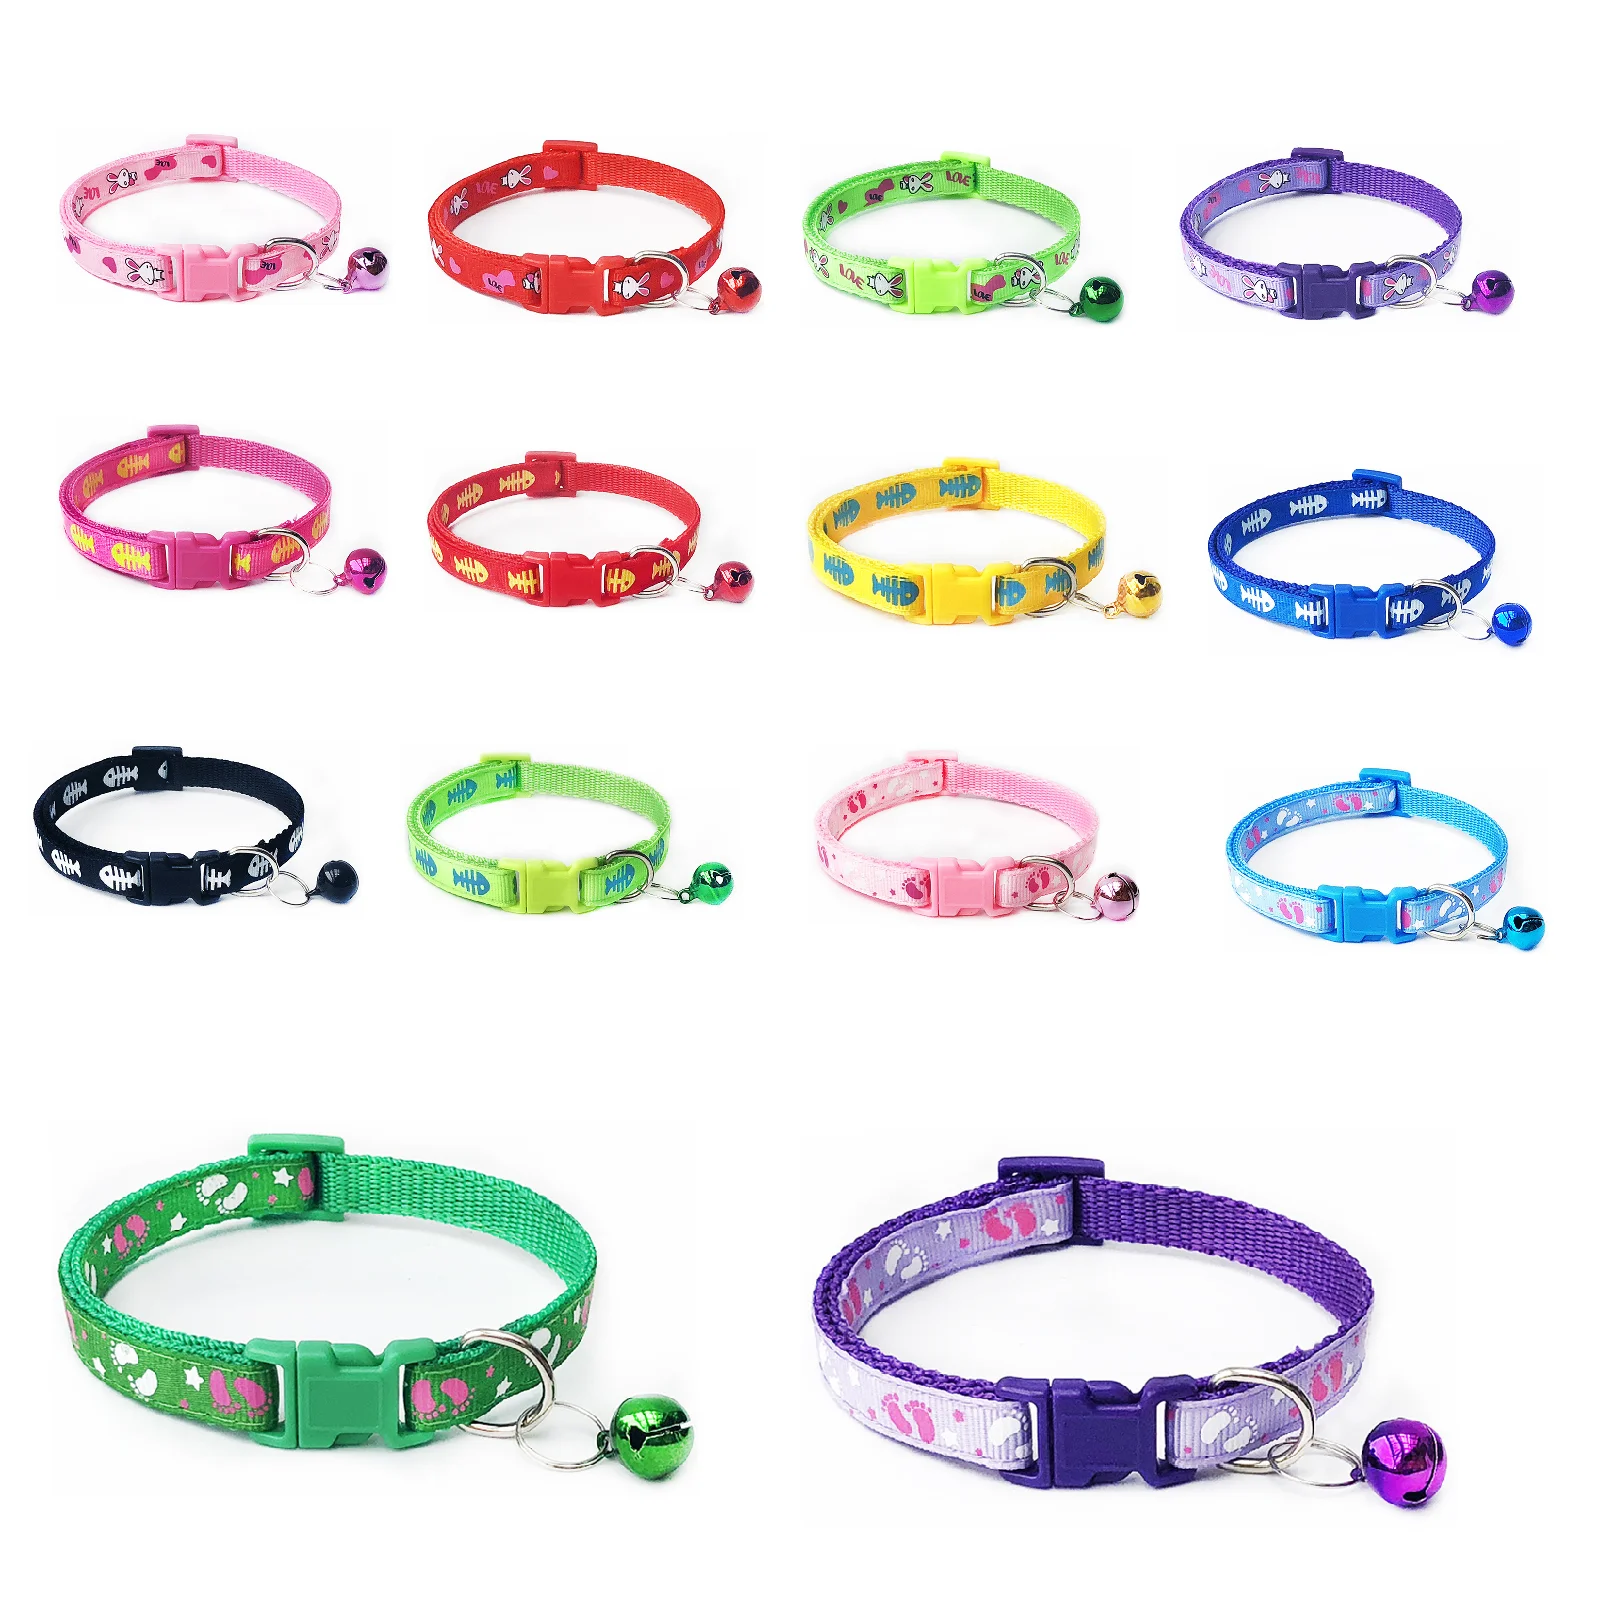 1pc Cartoon Dog Cat Collars With Bell Adjustable Polyester Buckle Collar Cat Pet Supplies Accessories Collar Small Dog Necklace cartoon dog cat collars with bell funny footprint adjustable polyester buckle collar cat pet supplies collar small dog chihuahua